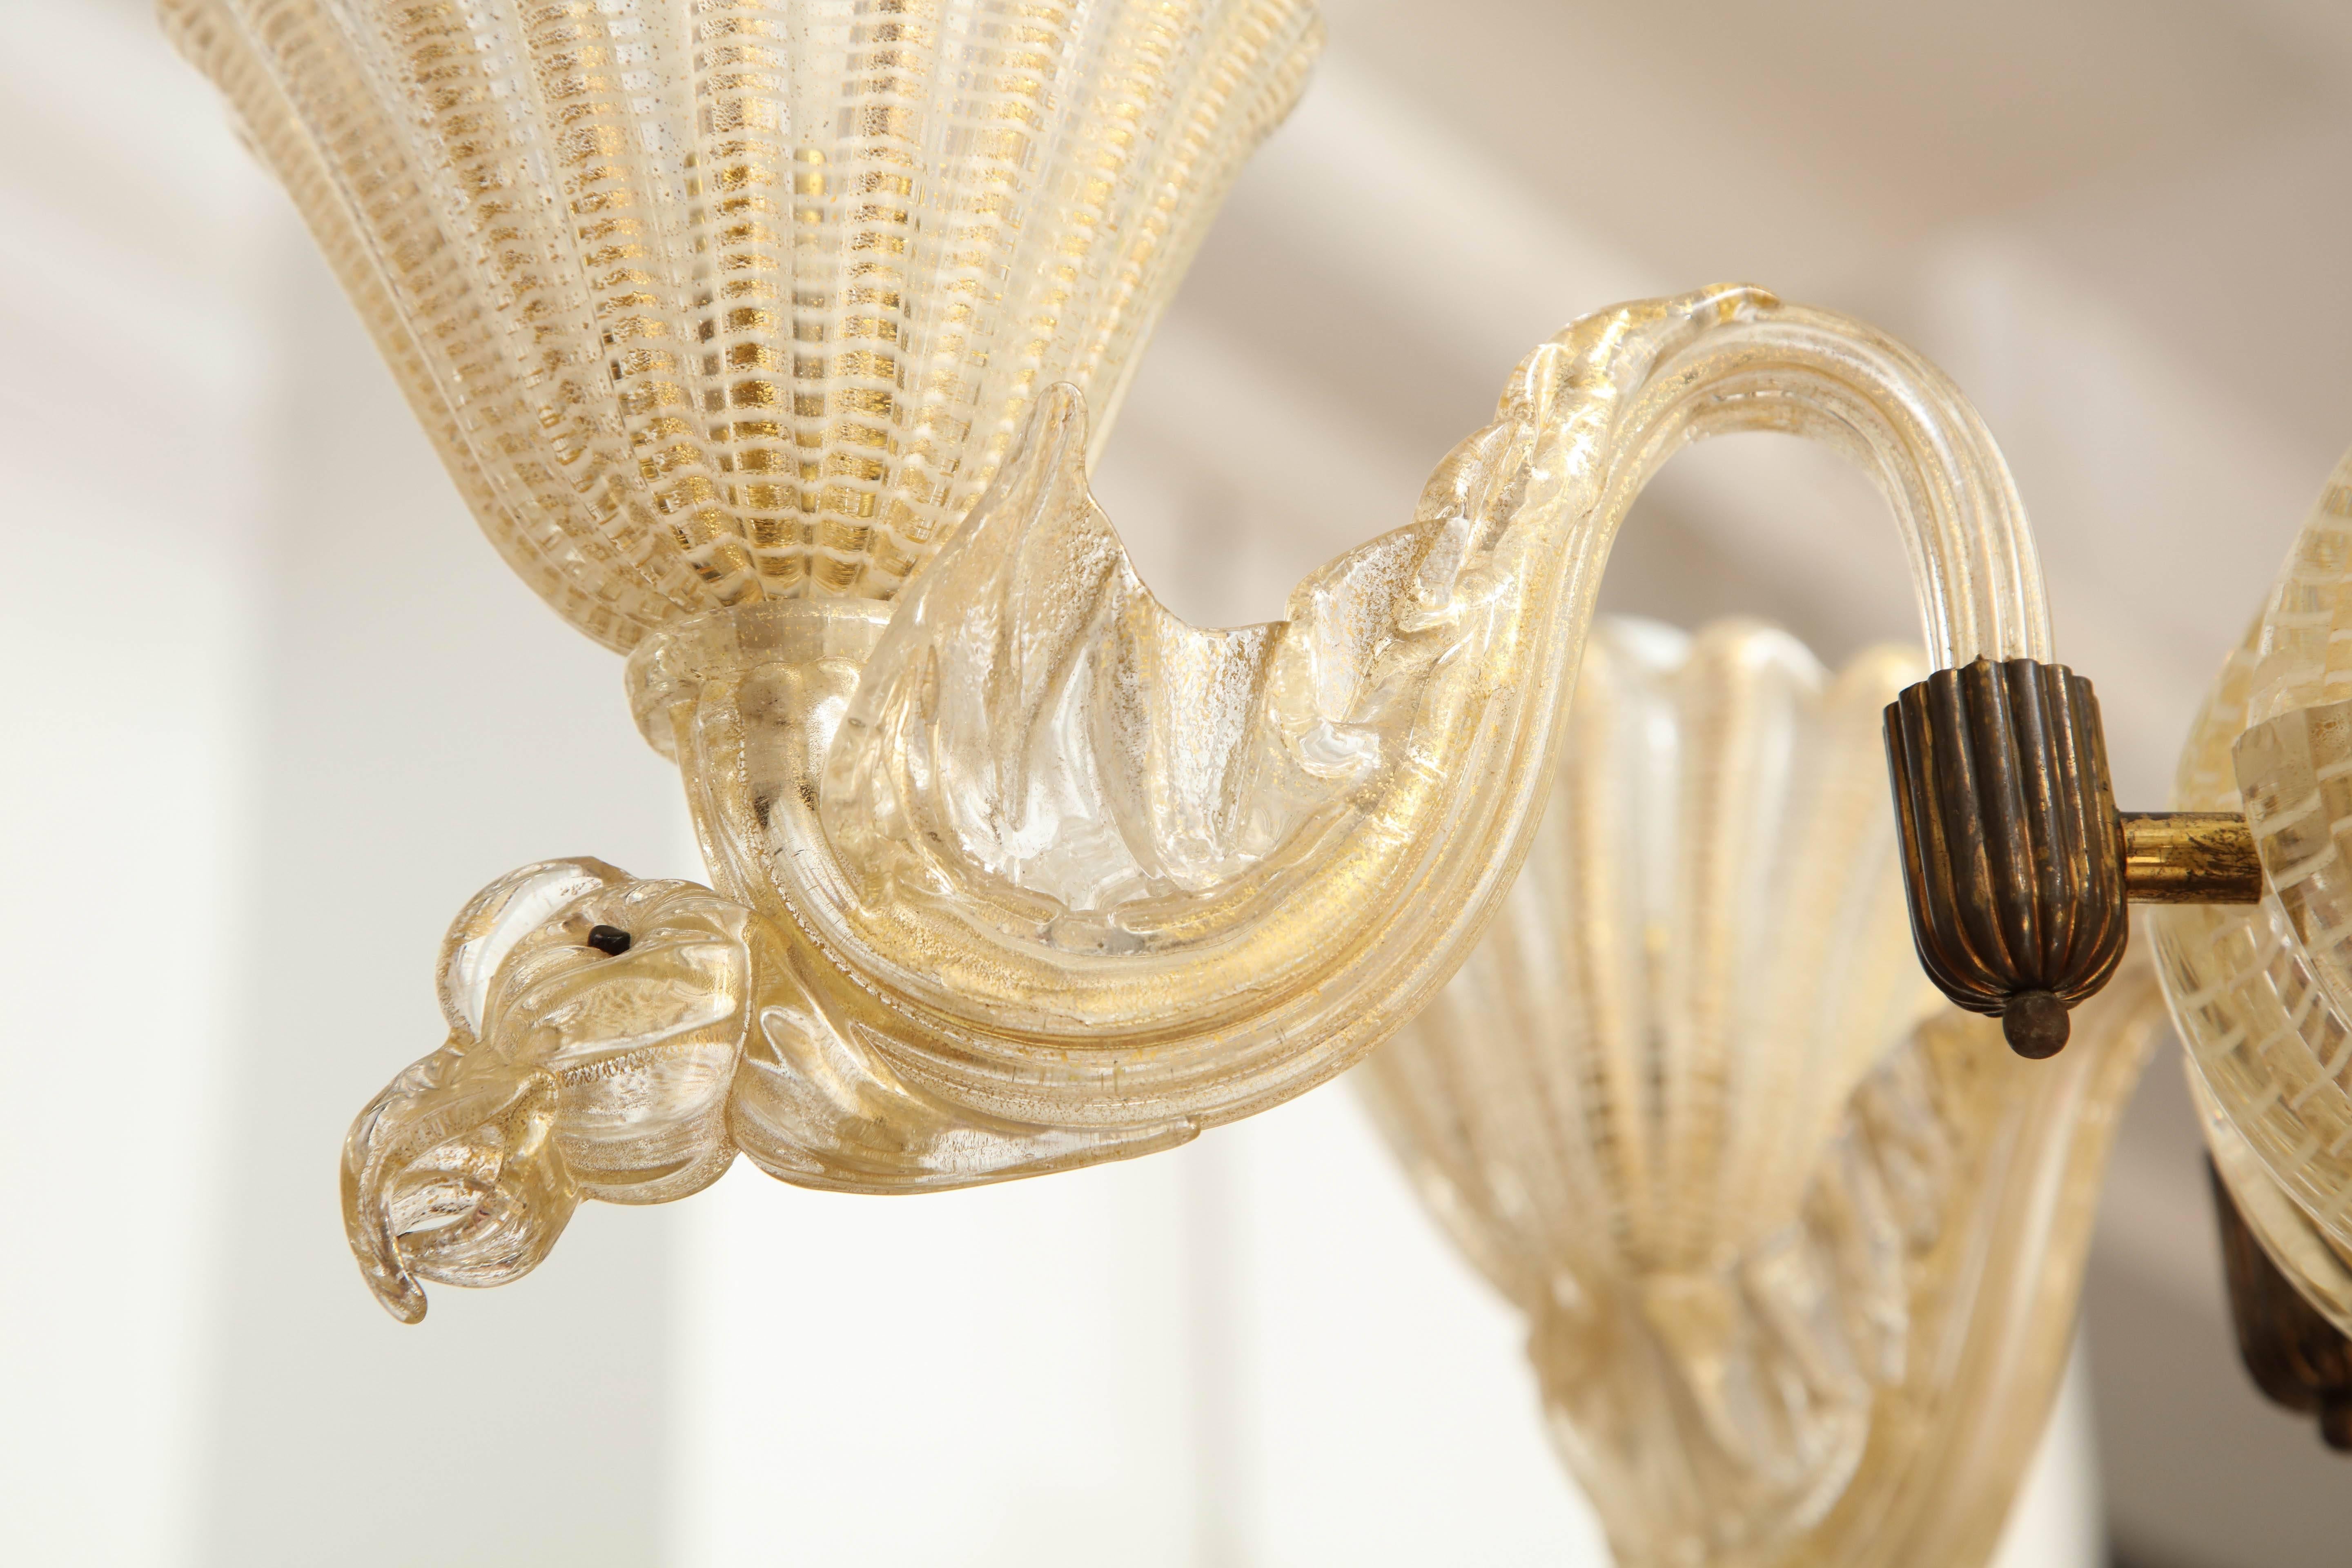 Blown Glass Barovier & Toso Chandelier Made in Venice, 1935 For Sale